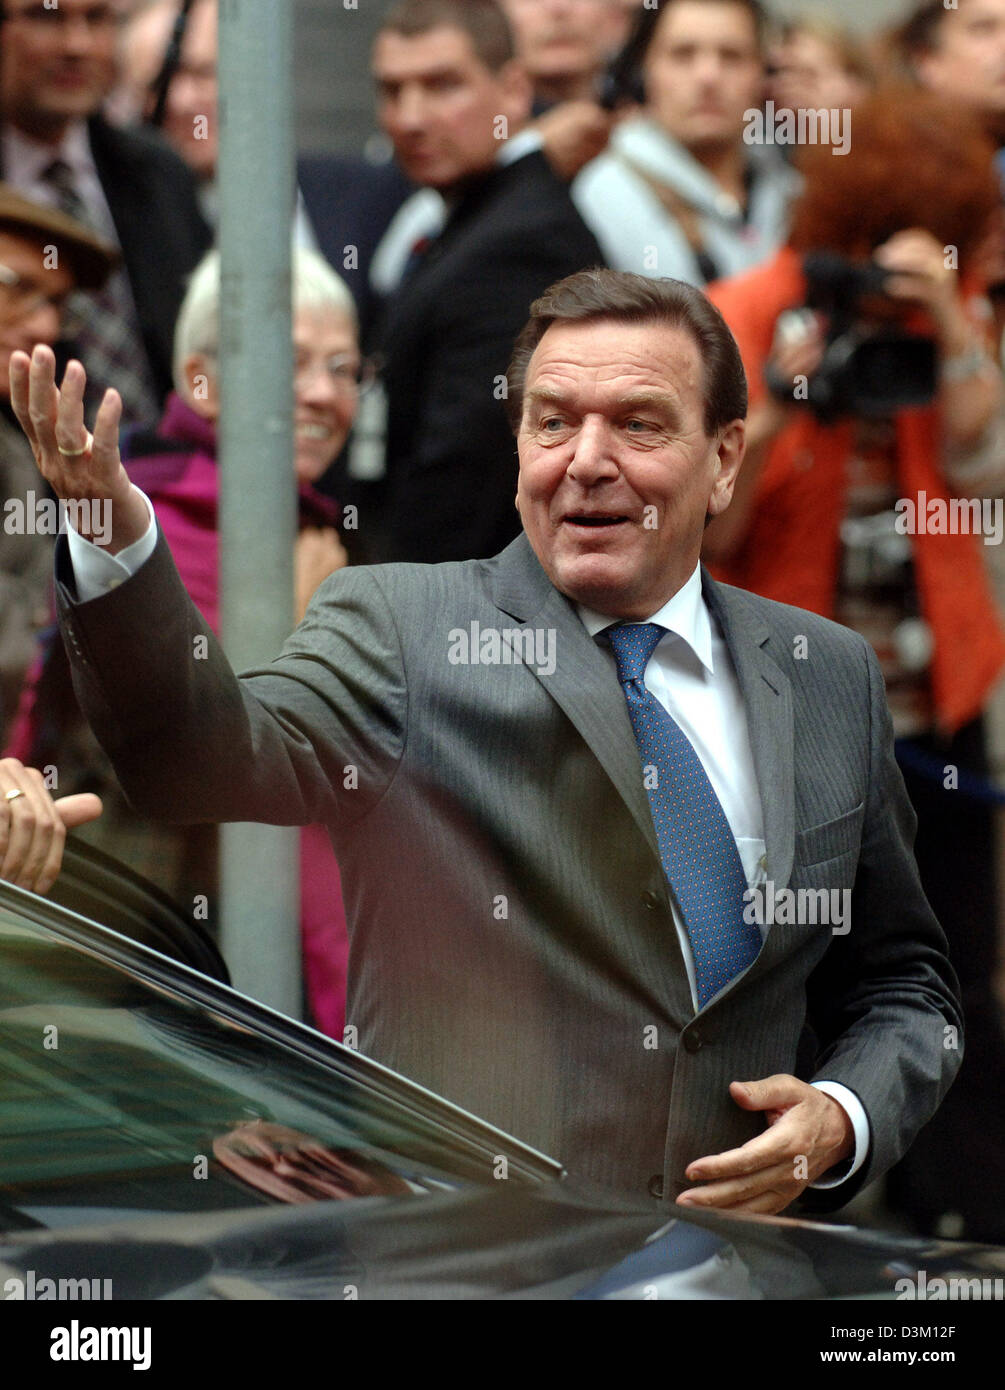 (dpa) - German Chancellor Gerhard Schoeder (SPD) arrives at the 'Willy-Brandt-Haus' to take part in the first exploratory talks with the Union (CDU/CSU) in Berlin, Germany, Monday 17 October 2005. Protestants of the Stock Photo